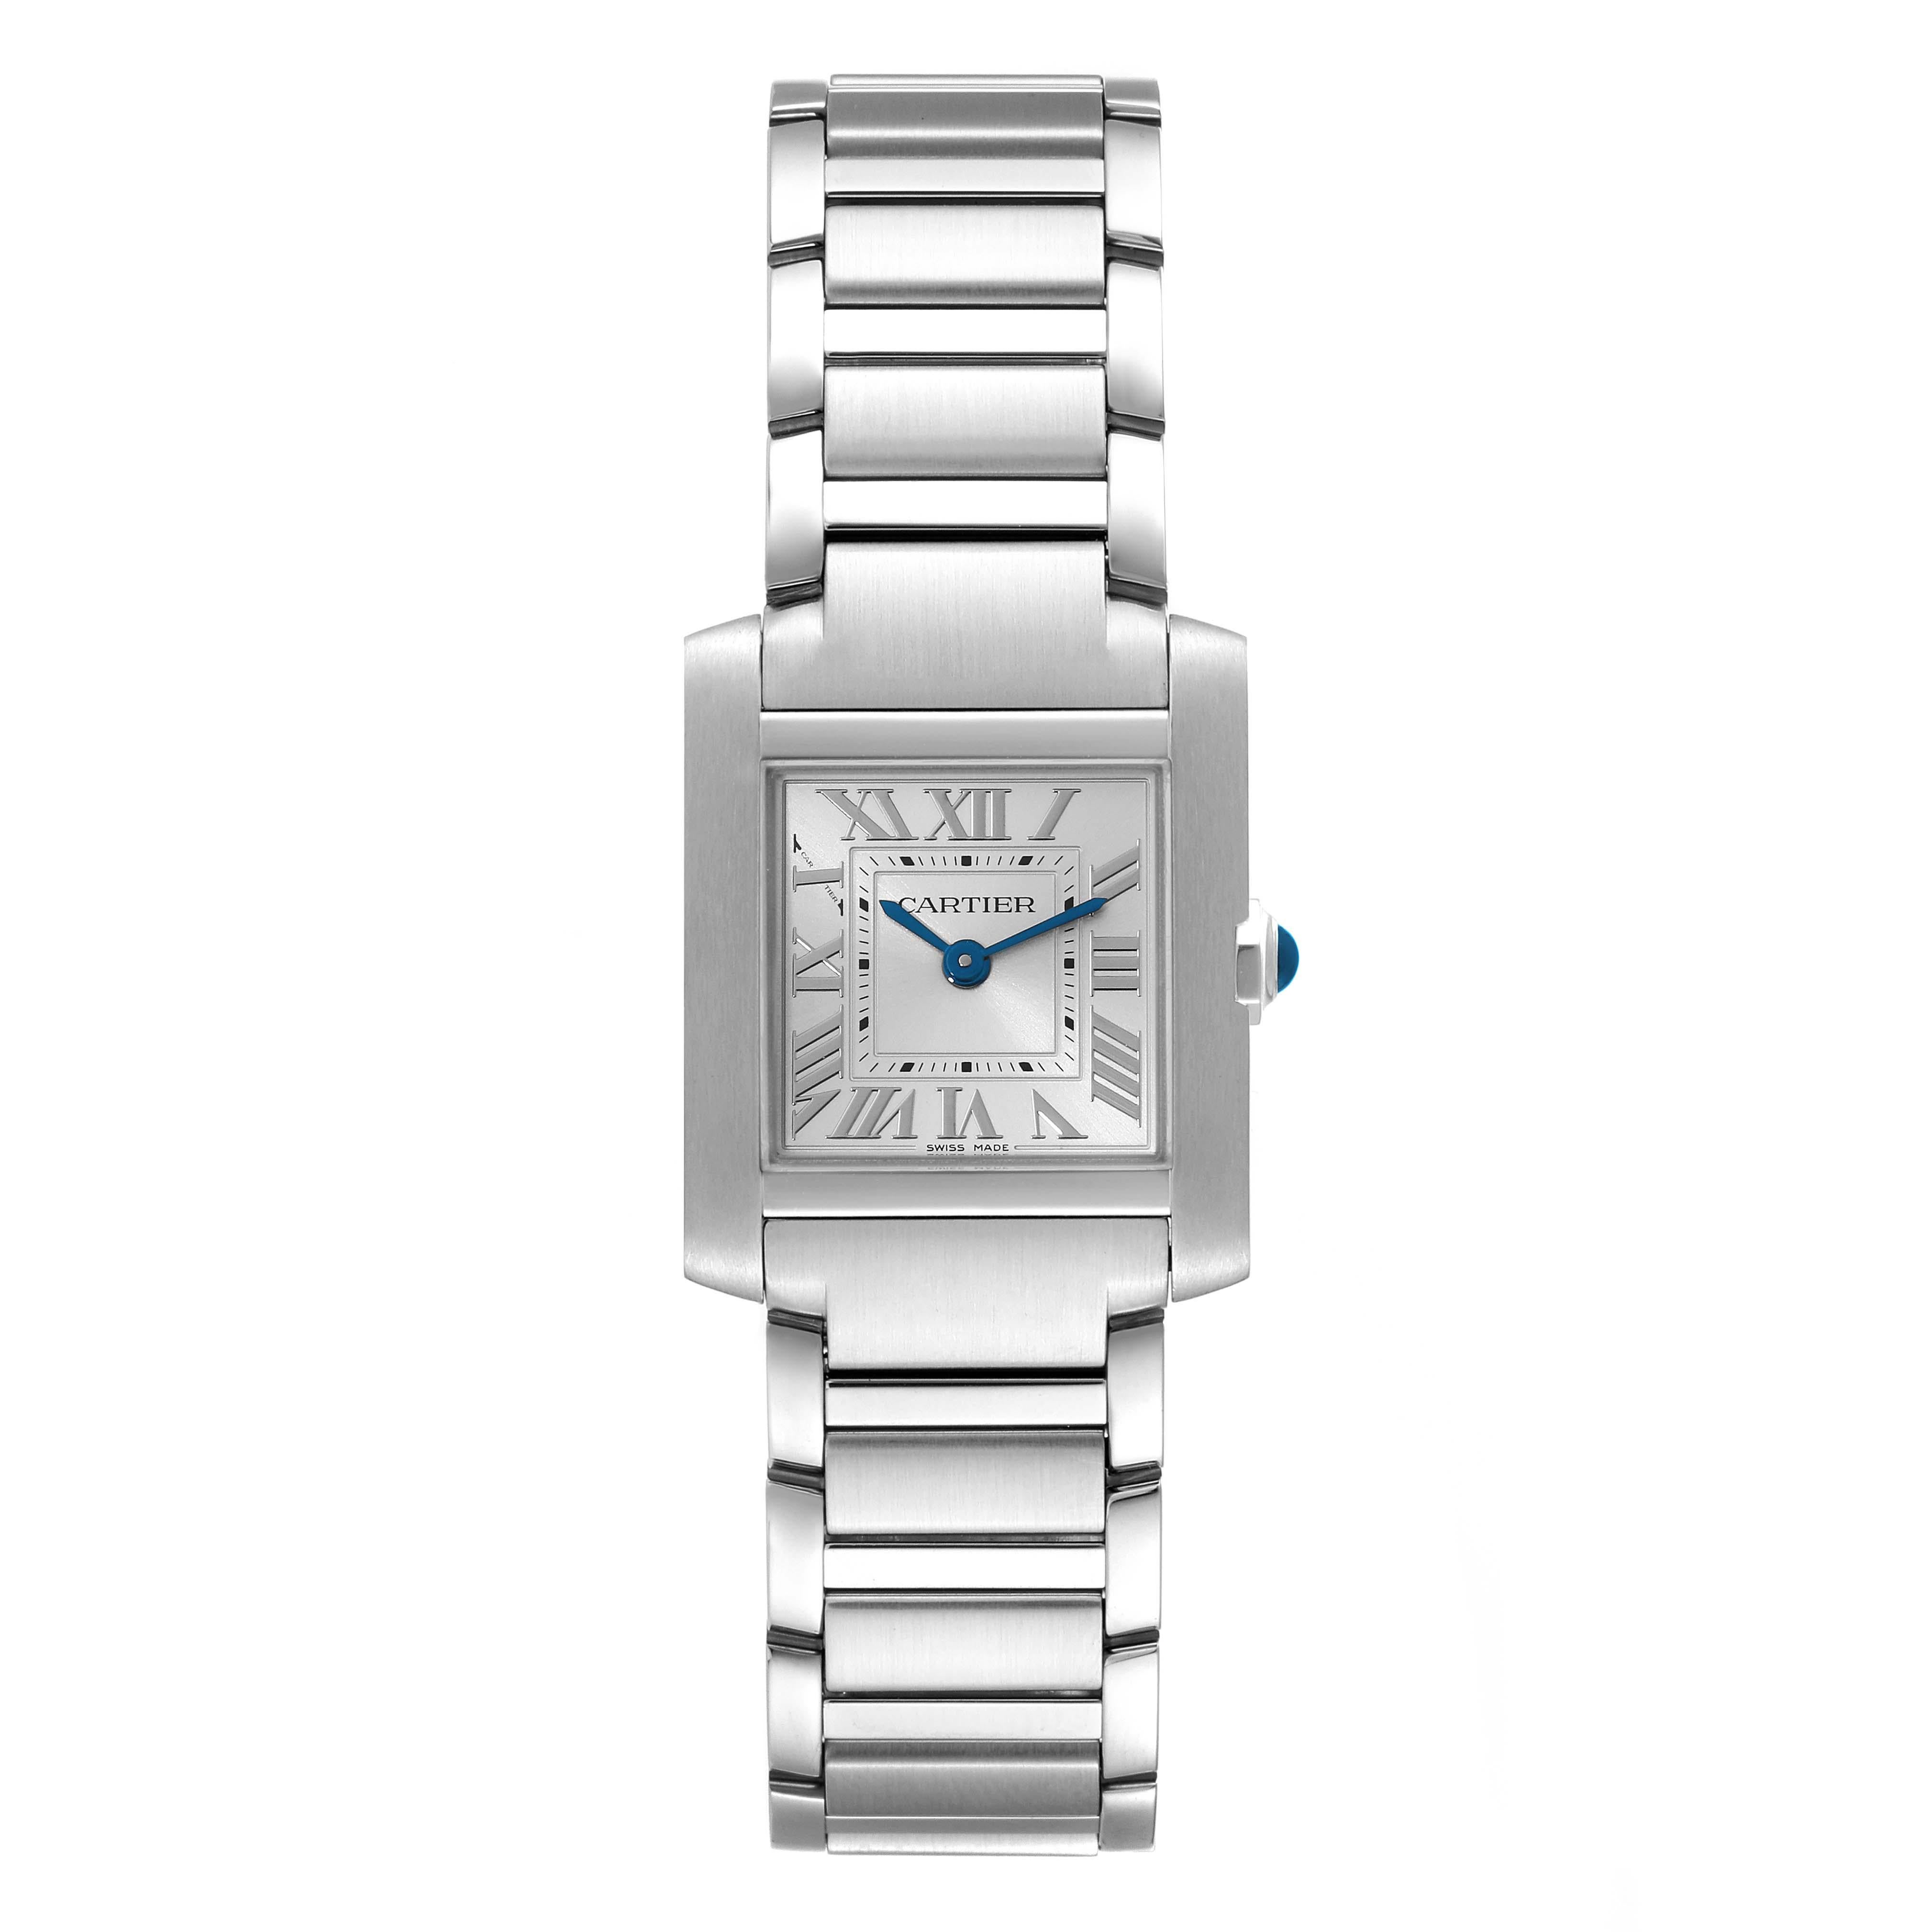 Cartier Tank Francaise Small Silver Dial Steel Ladies Watch WSTA0065. Quartz movement. Rectangular stainless steel 25.7 x 21.2 mm case. Octagonal crown set with a blue spinel cabochon. . Scratch resistant sapphire crystal. Silver opaline dial with